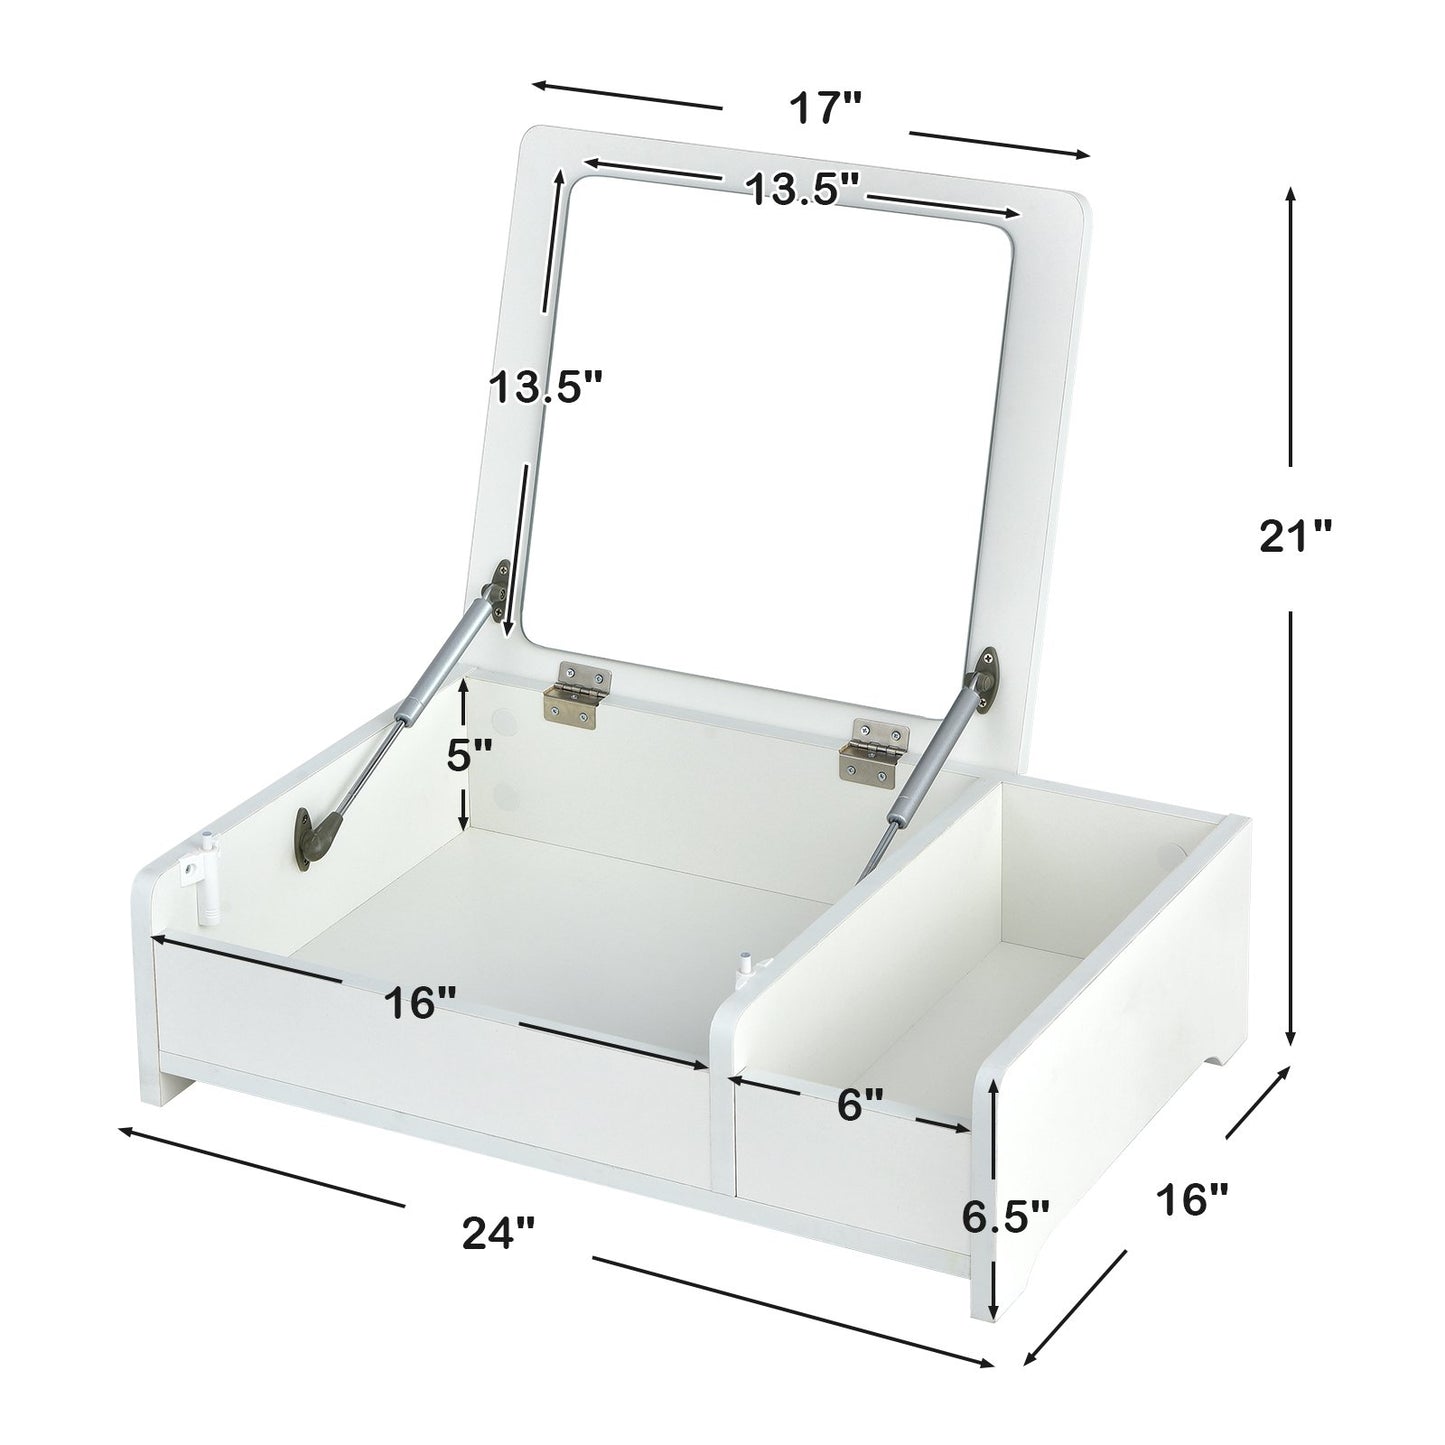 Compact Bay Window Makeup Dressing Table with Flip-Top Mirror, White